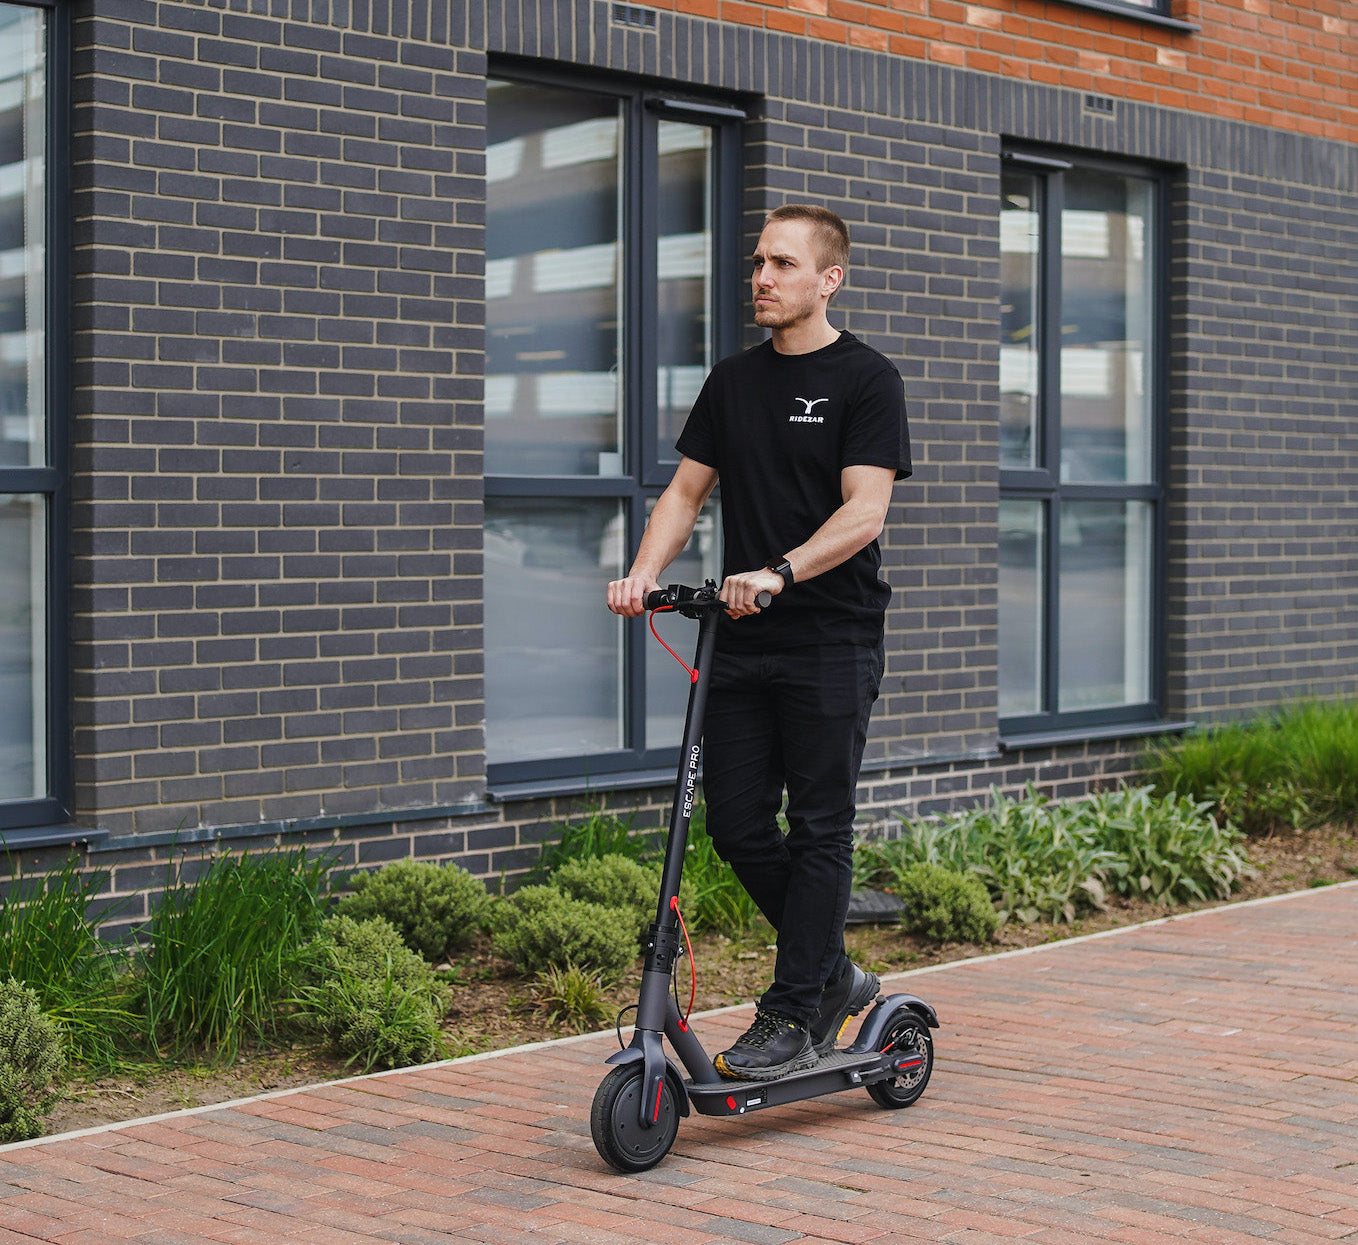 Male riding an Escape pro 2 electric scooter.